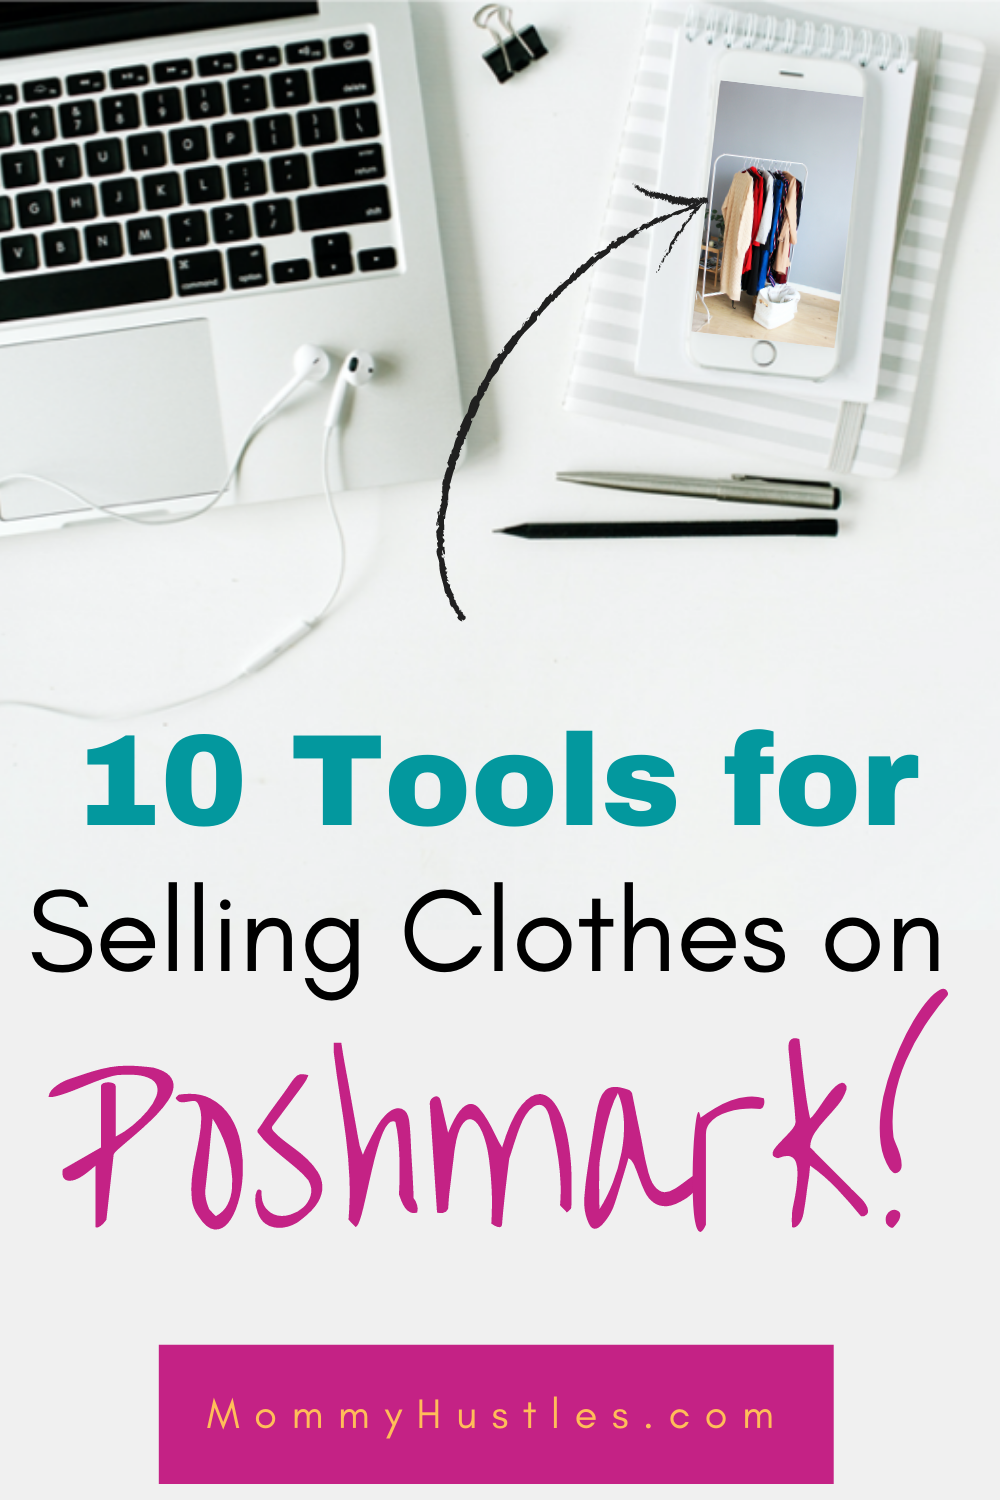 10 Tools You Should Have When You List Clothes to Sell on Poshmark